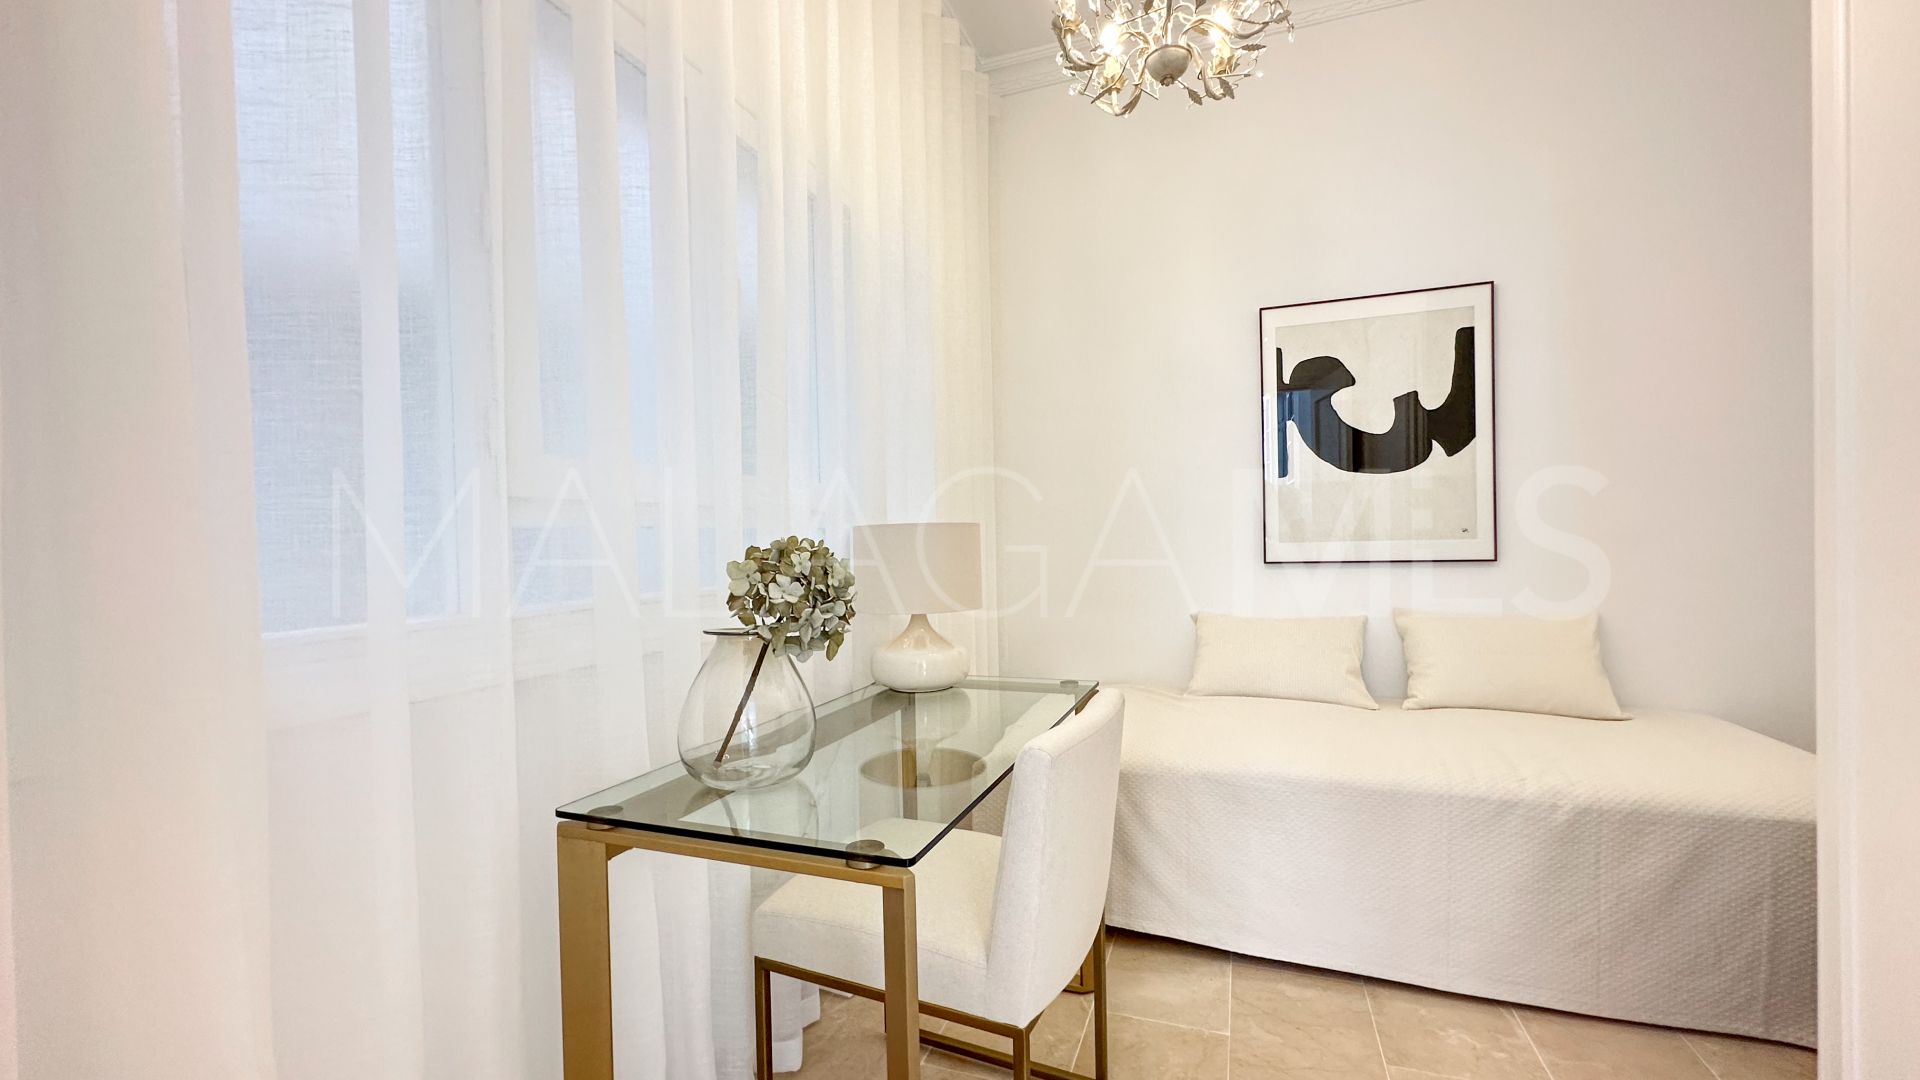 For sale apartment in Centro Histórico with 3 bedrooms